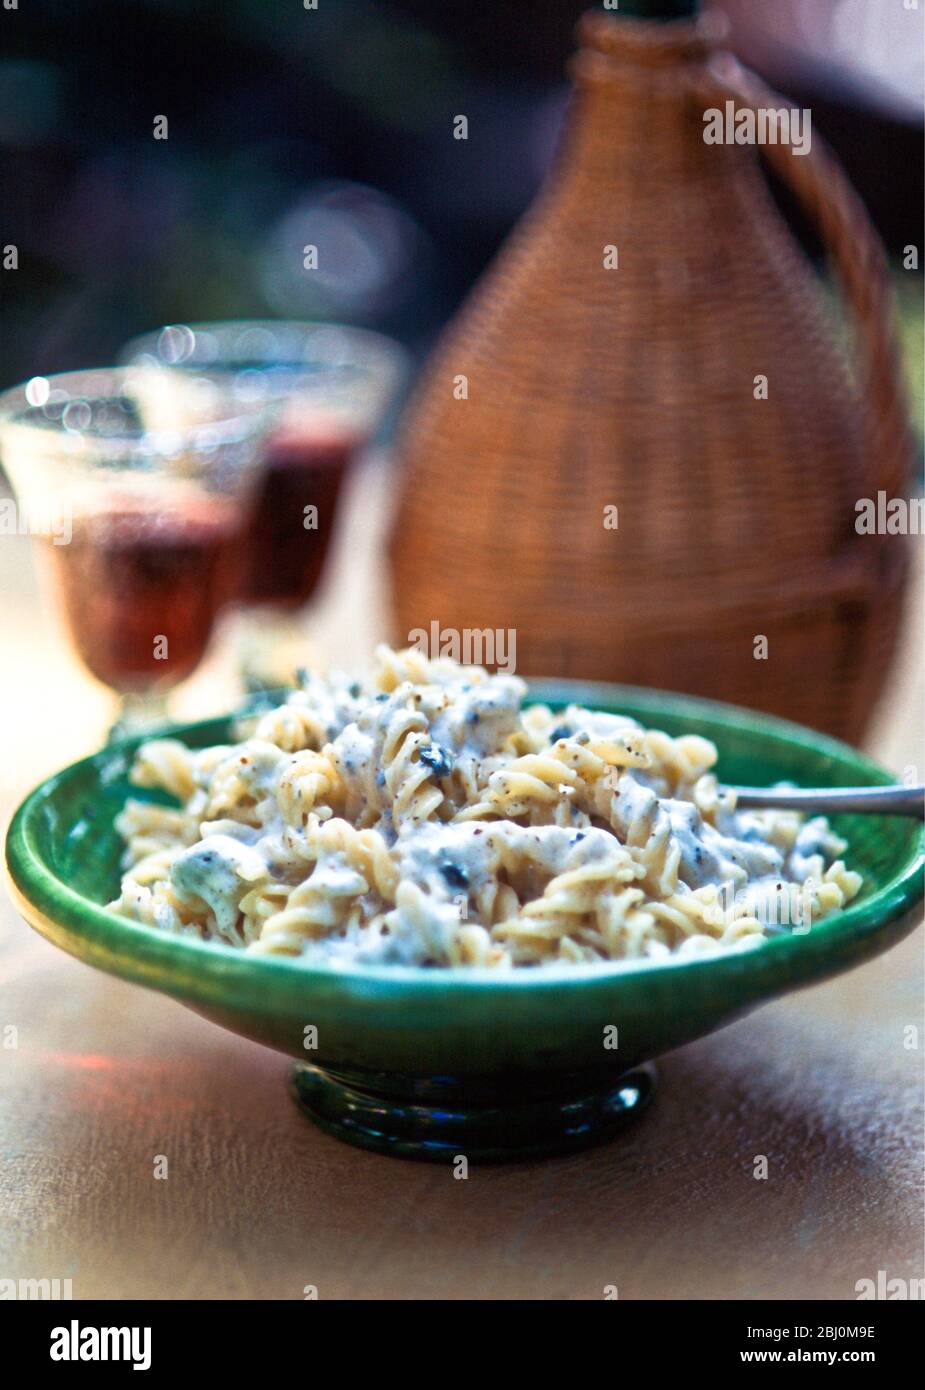 Dish of fusilli pasta with blue cheese creamy dressing on table outside - Stock Photo